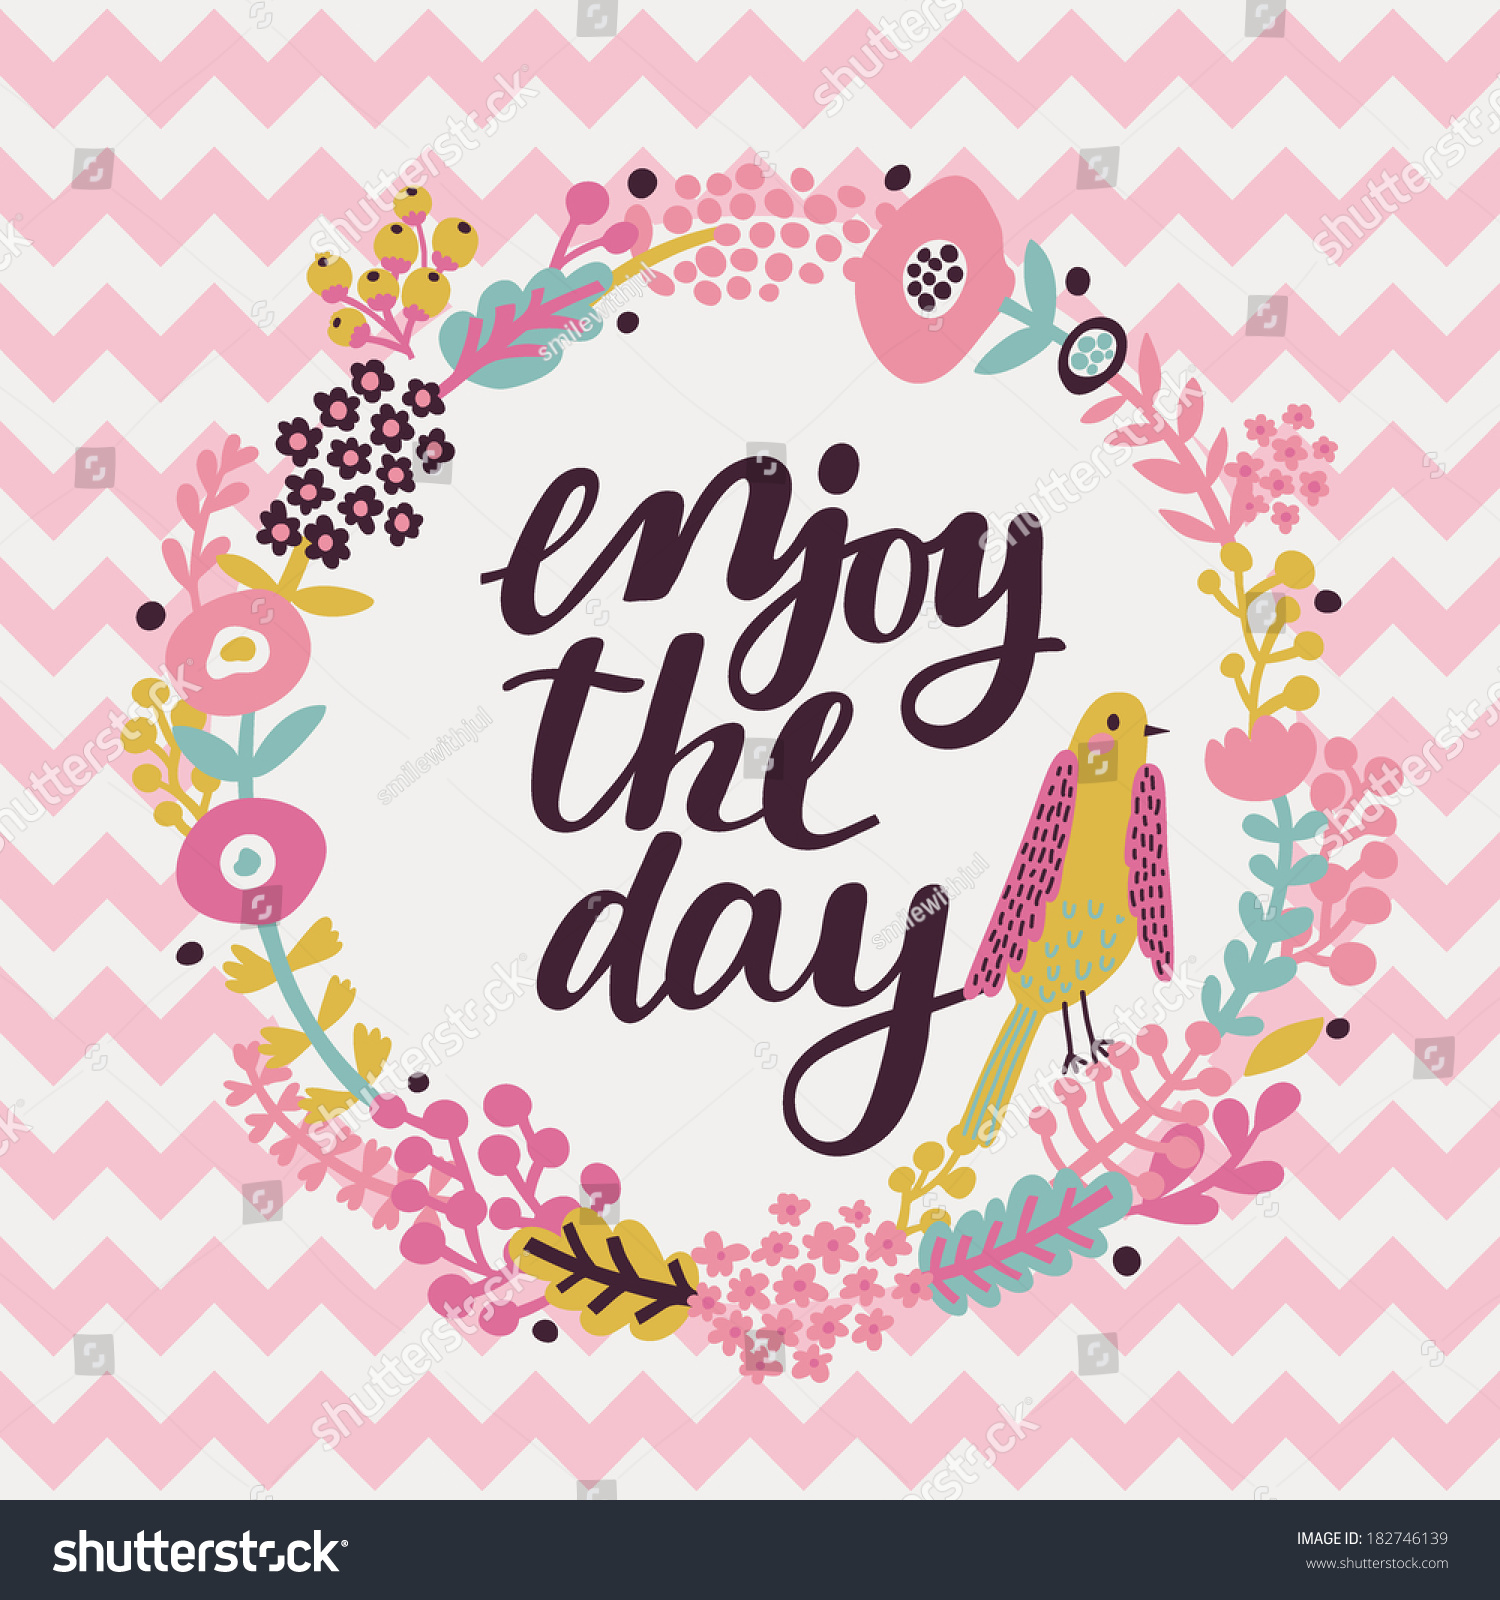 Inspirational Motivational Quotes Background Bright Floral Stock Vector 182746139 - Shutterstock